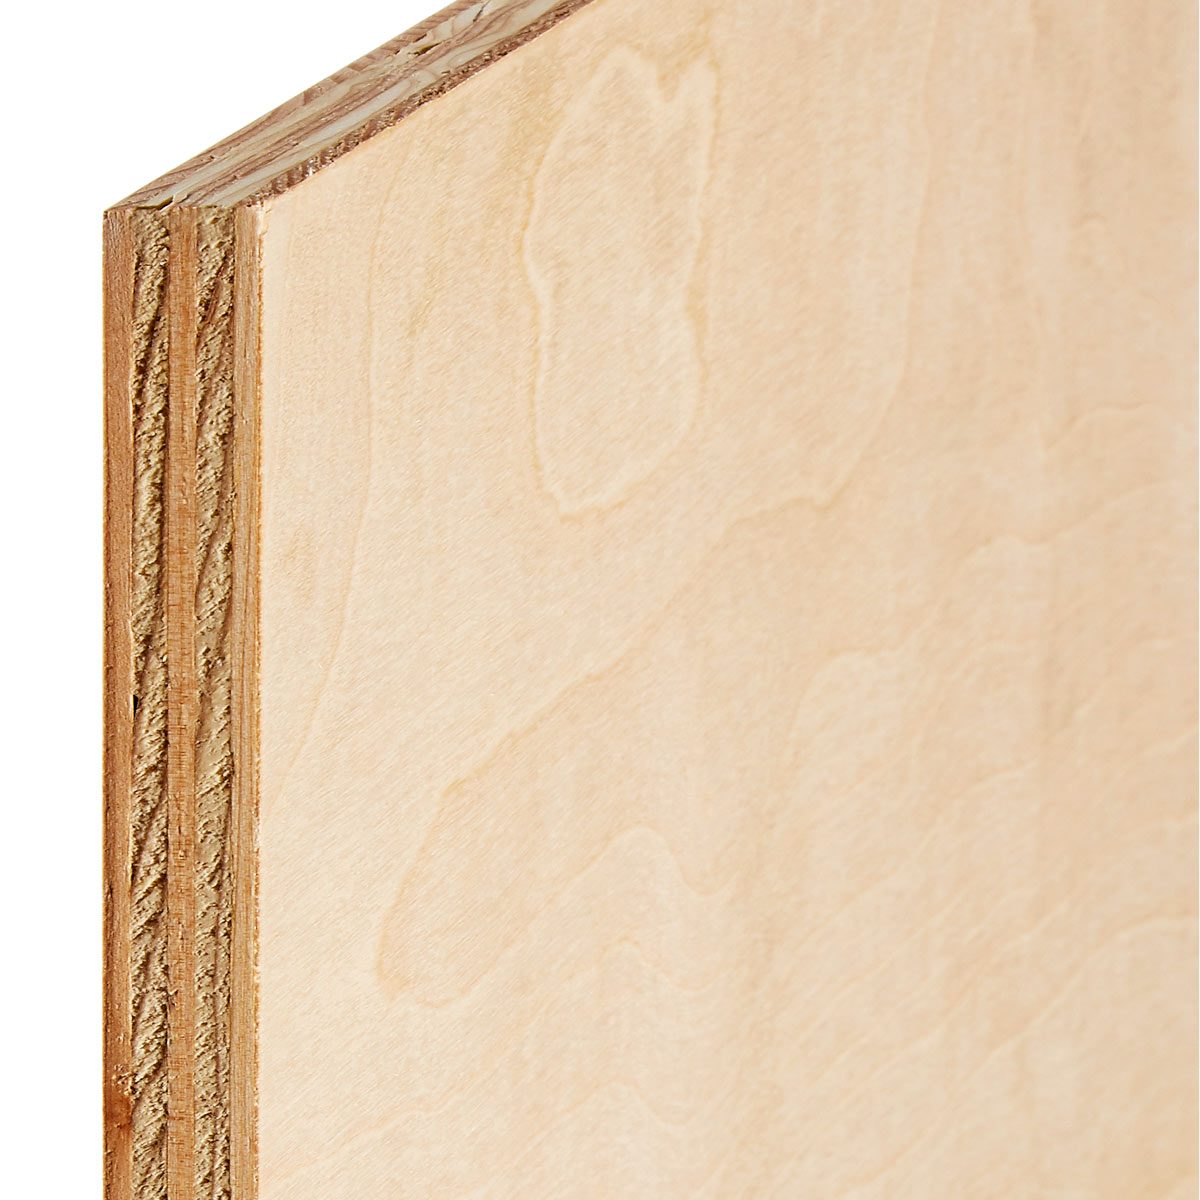 The Homeowner's Guide to Plywood Core Options